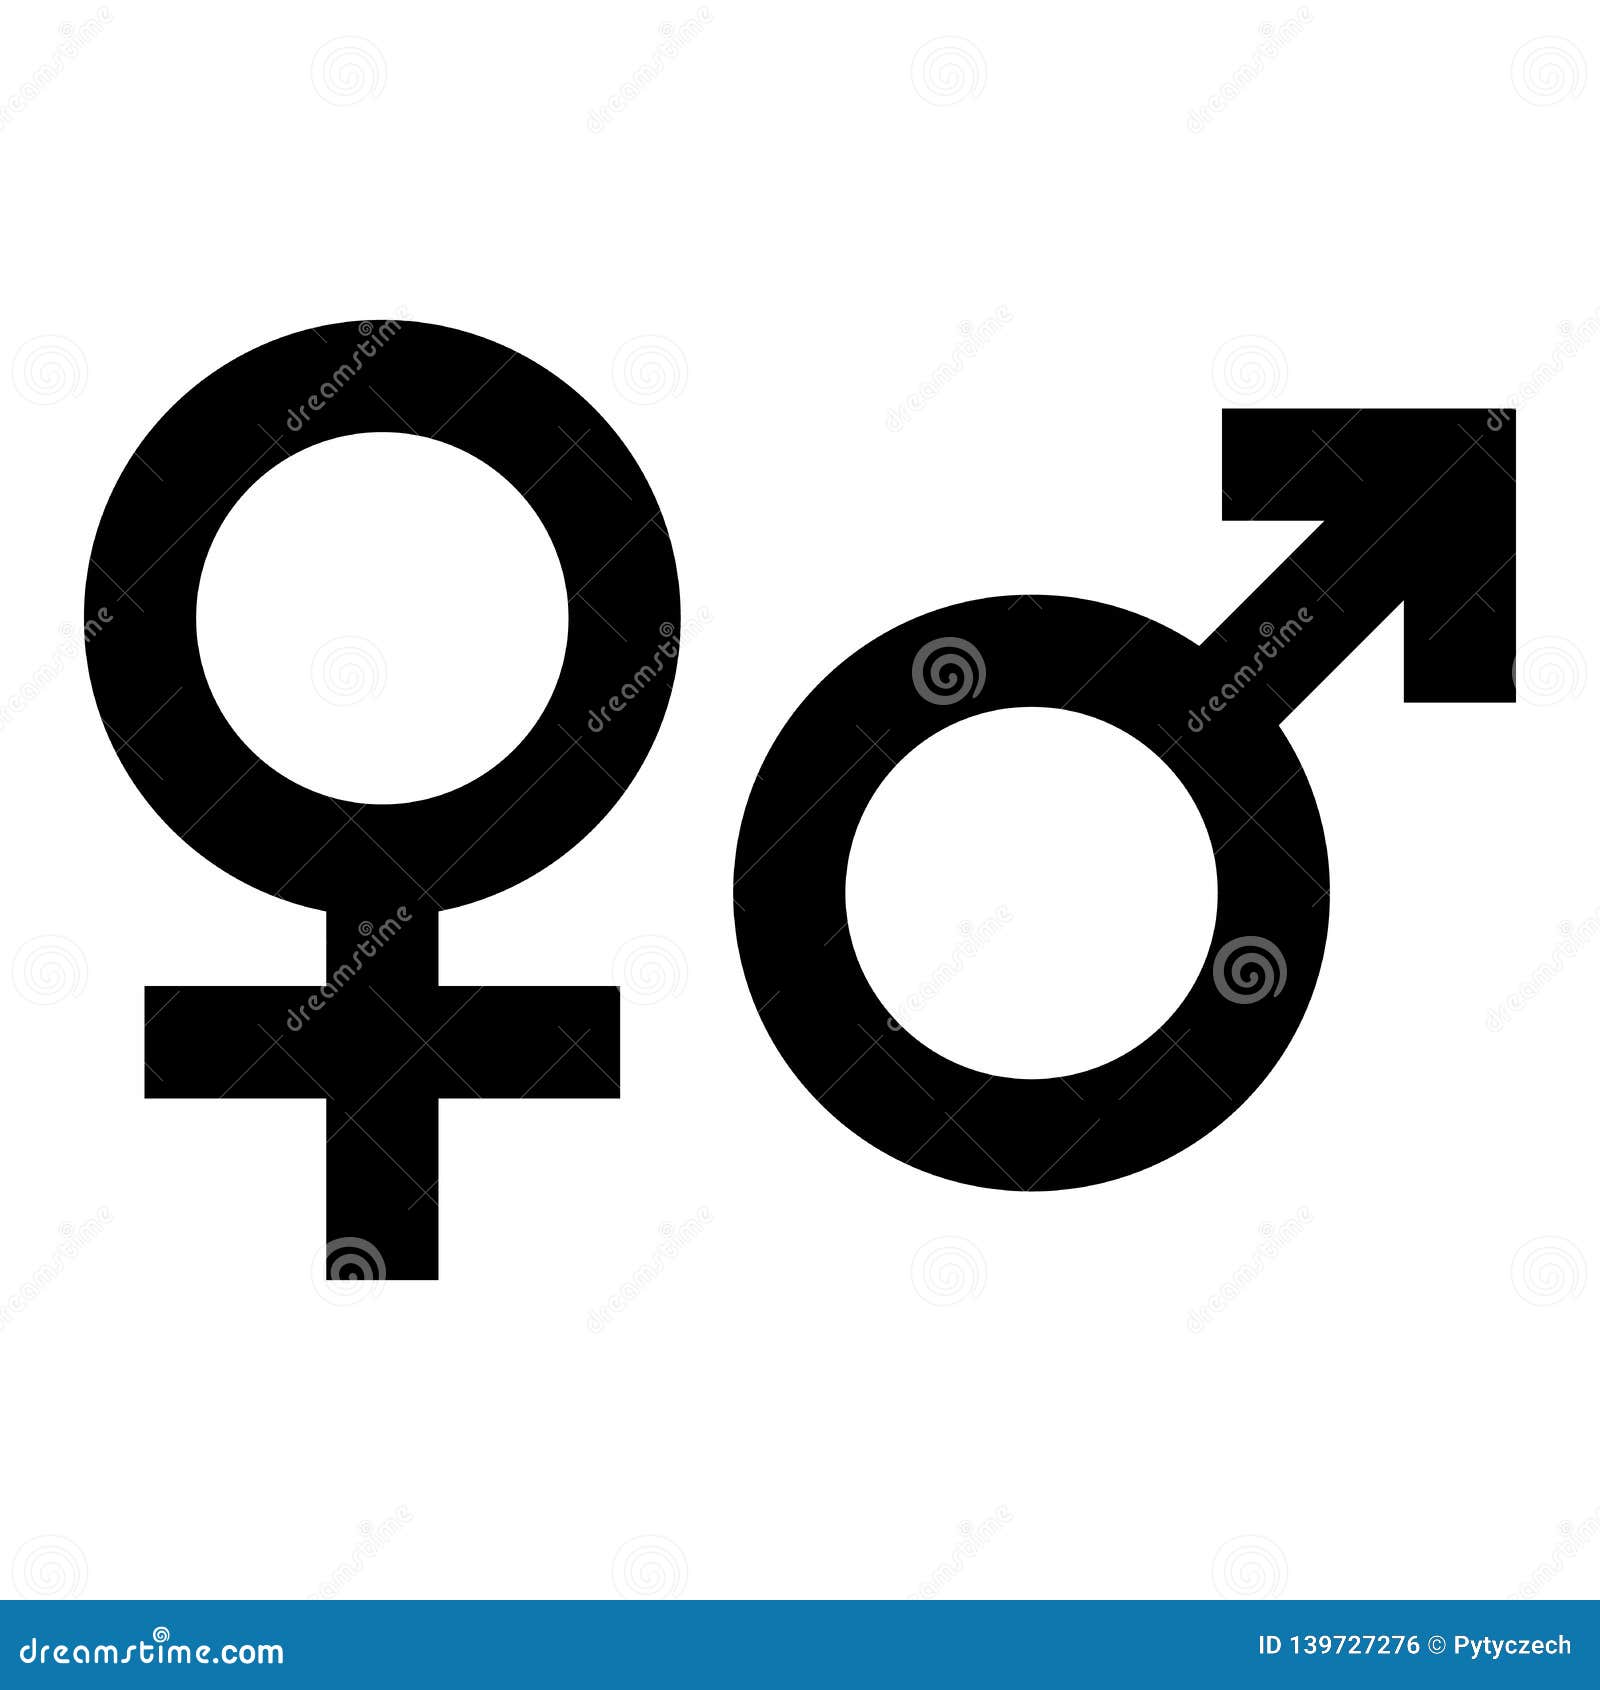 Male And Female Gender Symbol Simple Black Flat Icon With